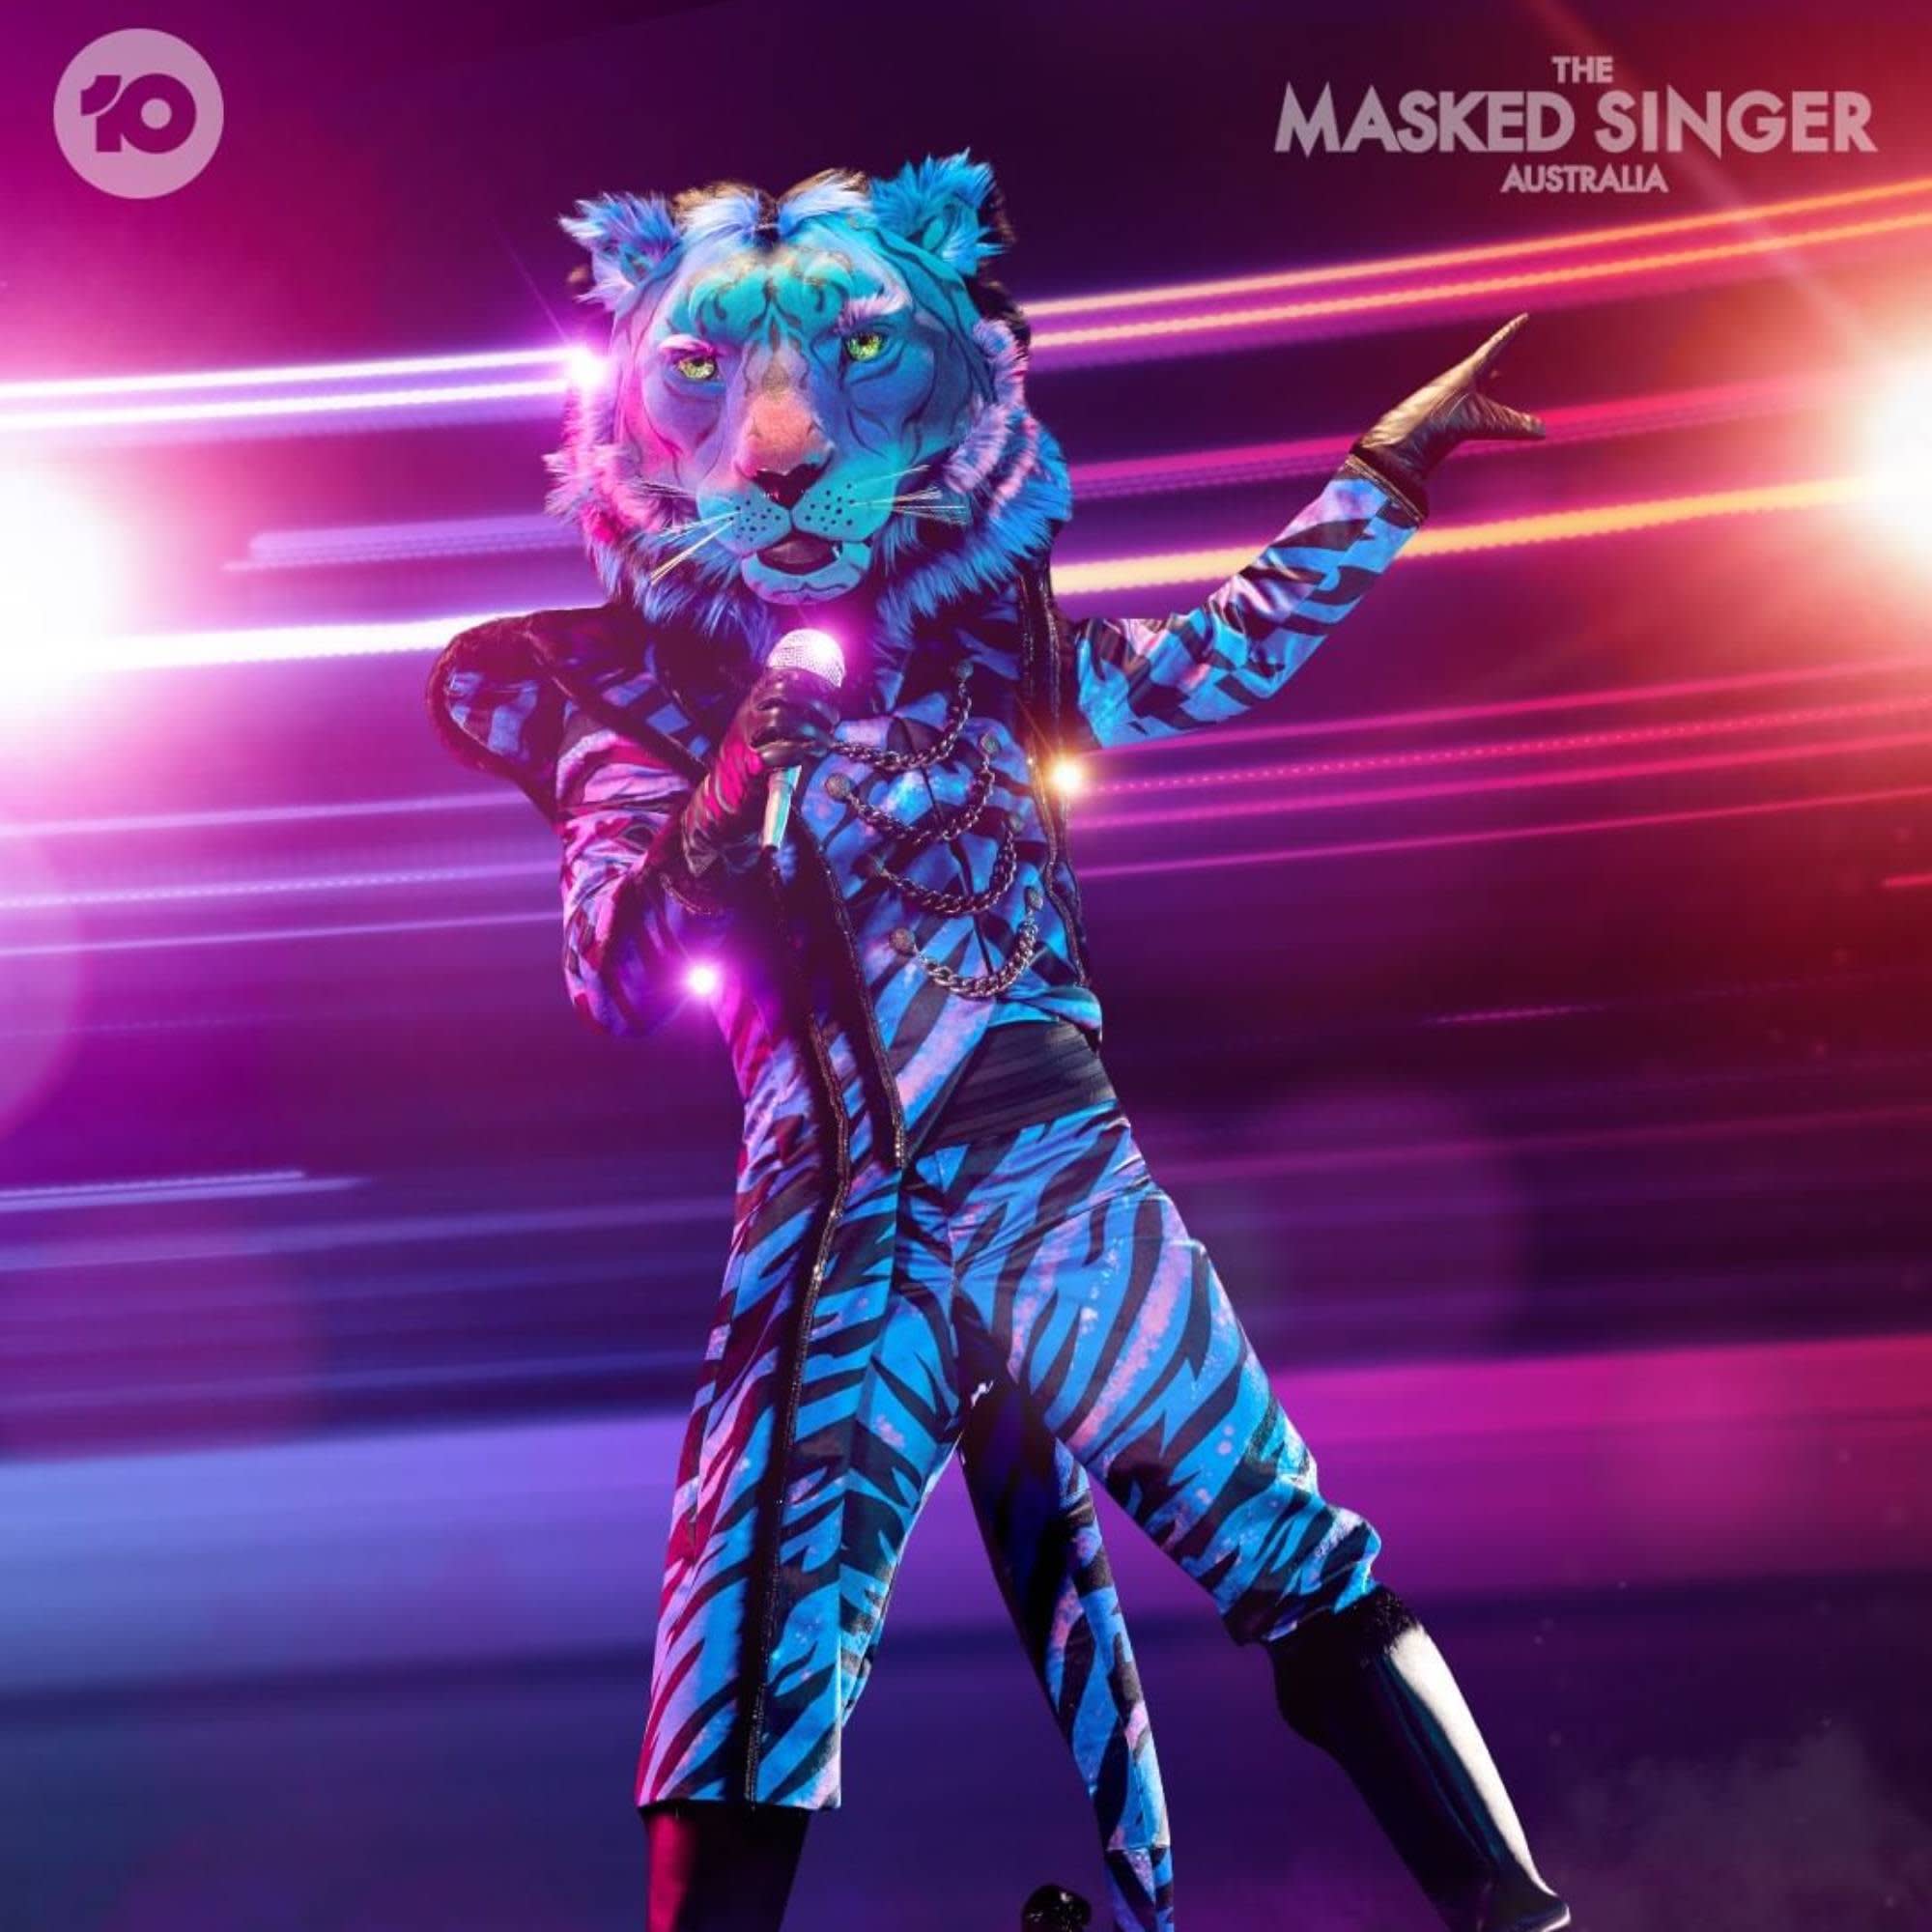 You Asked, We Answered How Real Is The Masked Singer? POPSUGAR Australia